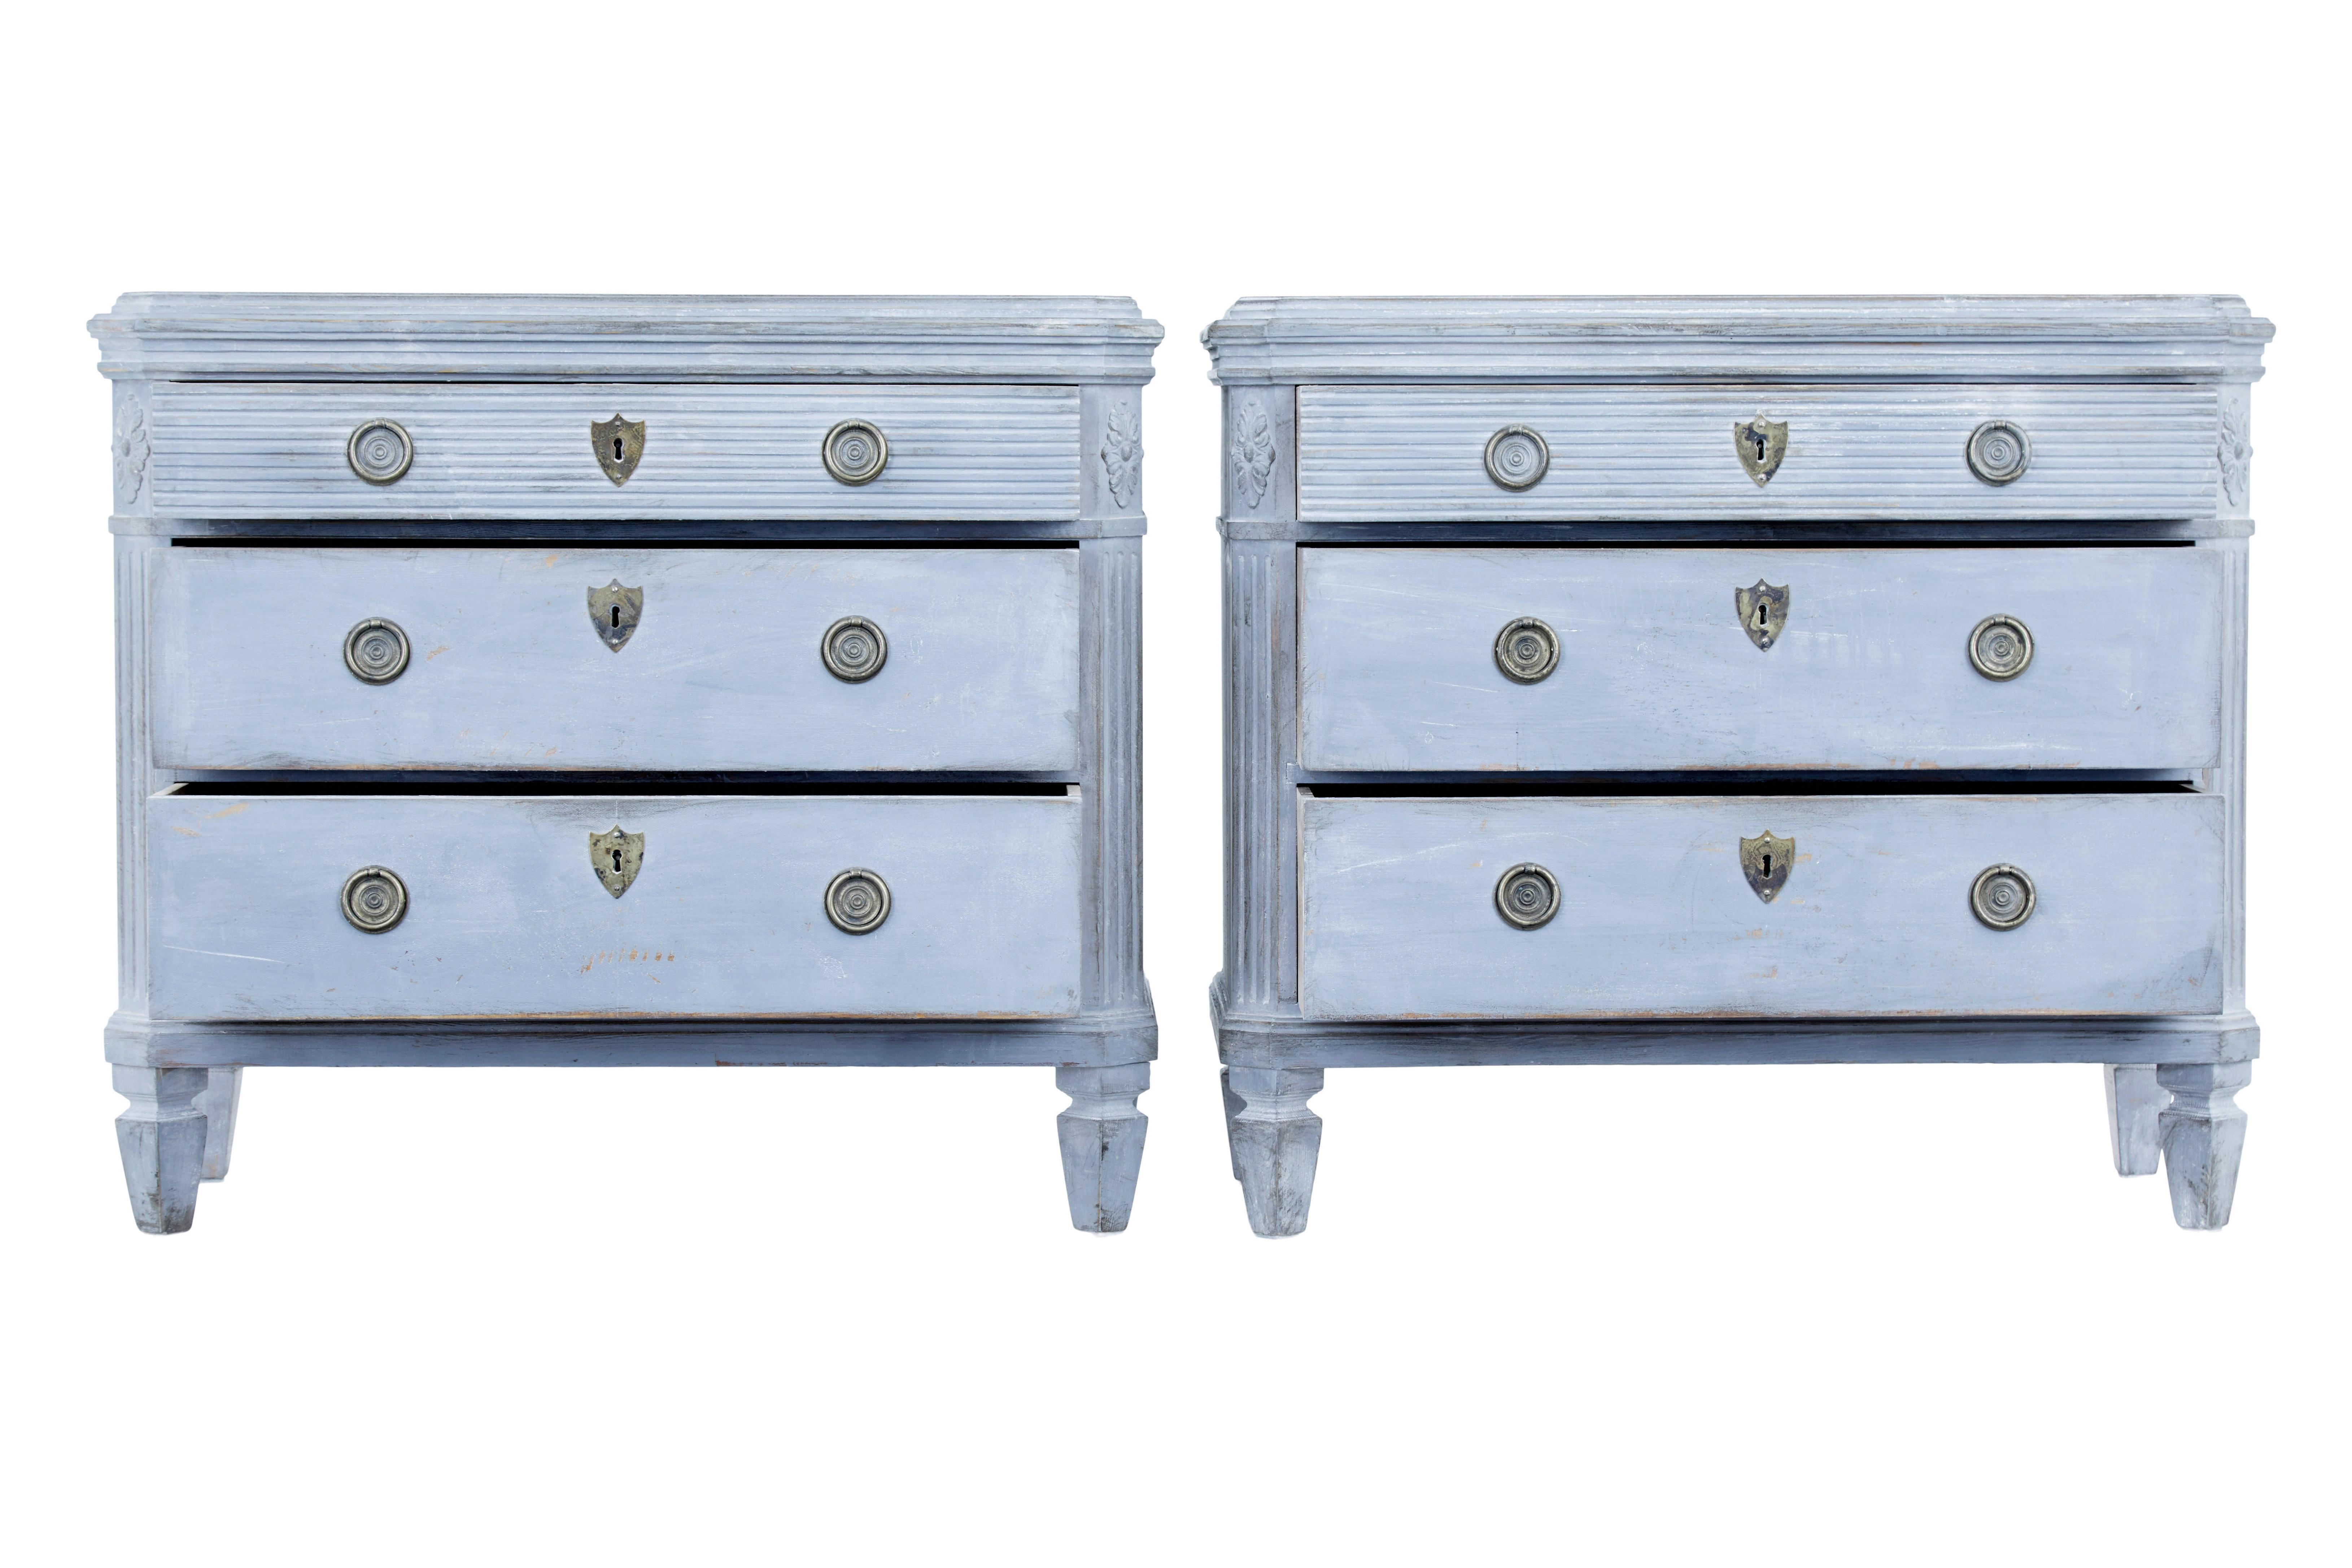 Pair of 19th century painted swedish commodes circa 1870.

Good quality pair of gustavian influenced chest of drawers.

Rectangular tops with canted corners and moulded edging.  Each chest is fitted with 3 drawers, the top drawer with channeled